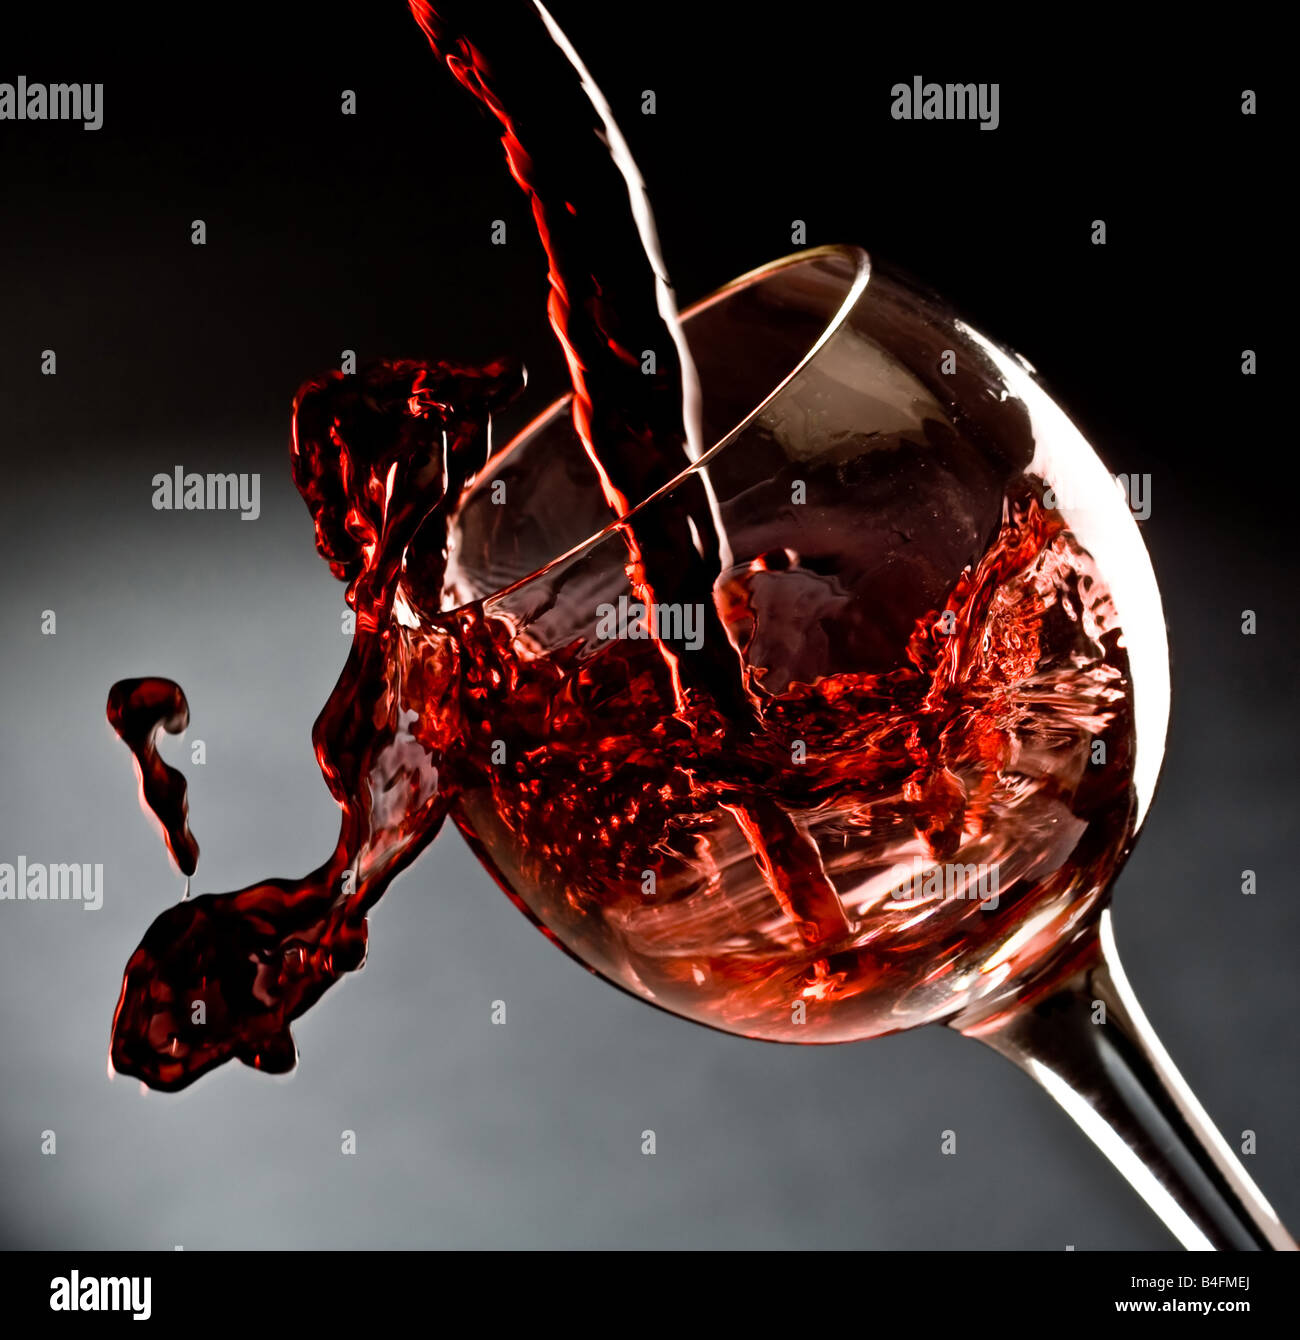 Red wine pouring into a wine glass Stock Photo